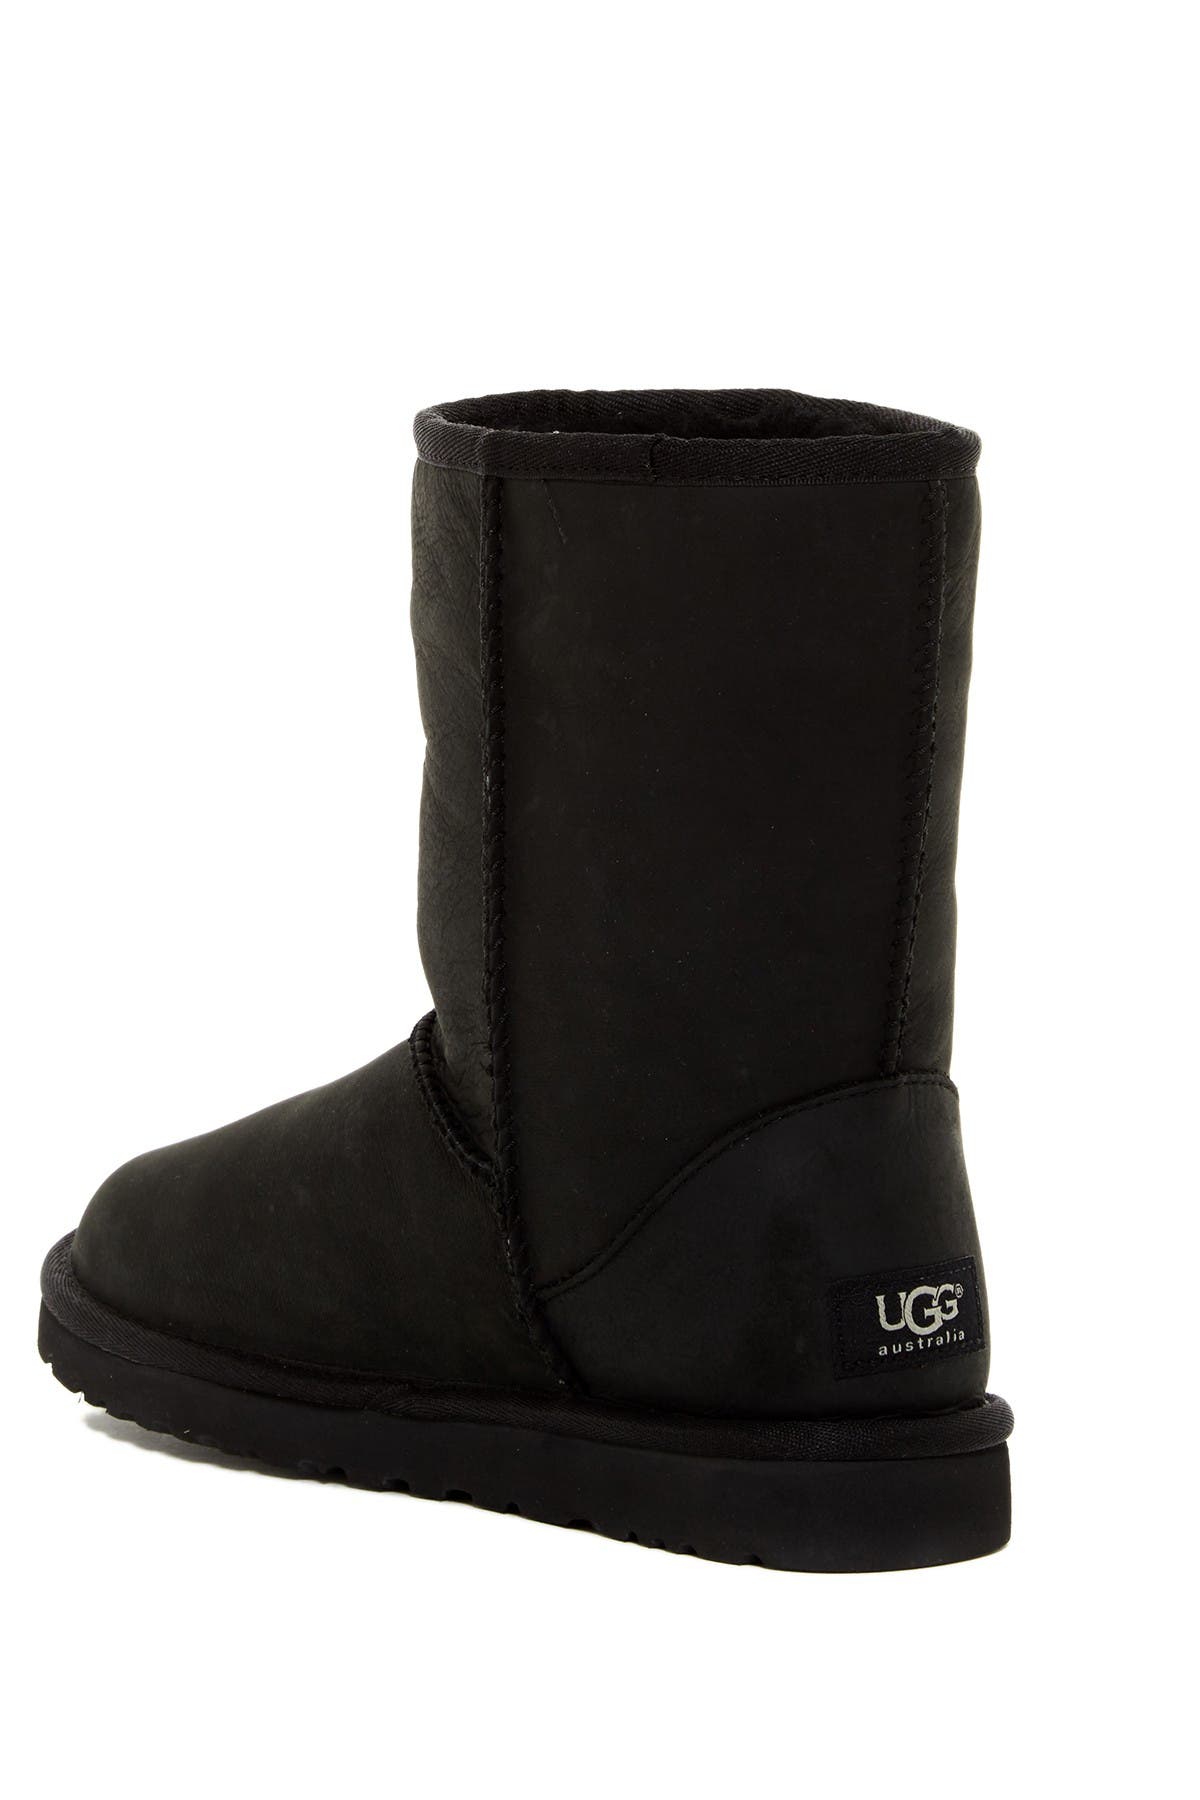 ugg classic leather boots